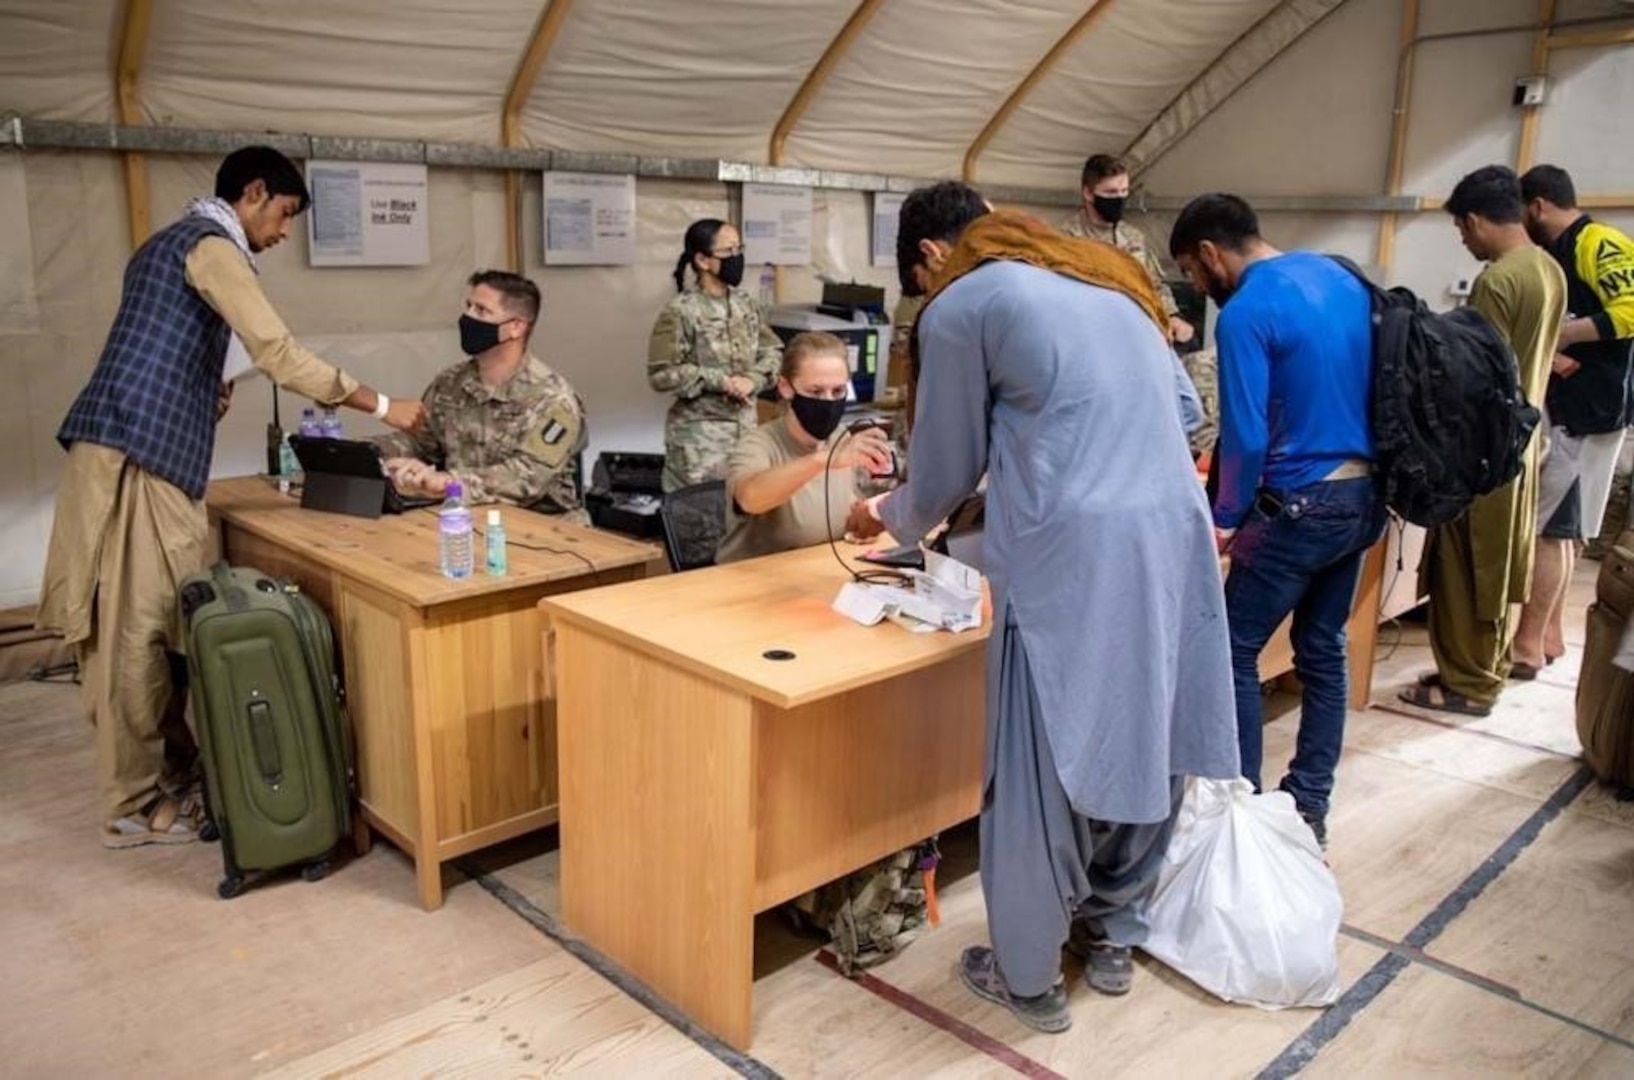 U.S. Army Central Soldiers welcome and assist Afghan evacuees as they arrive and process through locations in Kuwait. DLA Troop Support’s Clothing and Textiles supply chain expedited shipping of approximately 5,000 disaster blankets and 90 general purpose tents, which hold up to 10 people each, were delivered to Camp Arifjan September 3, 2021.